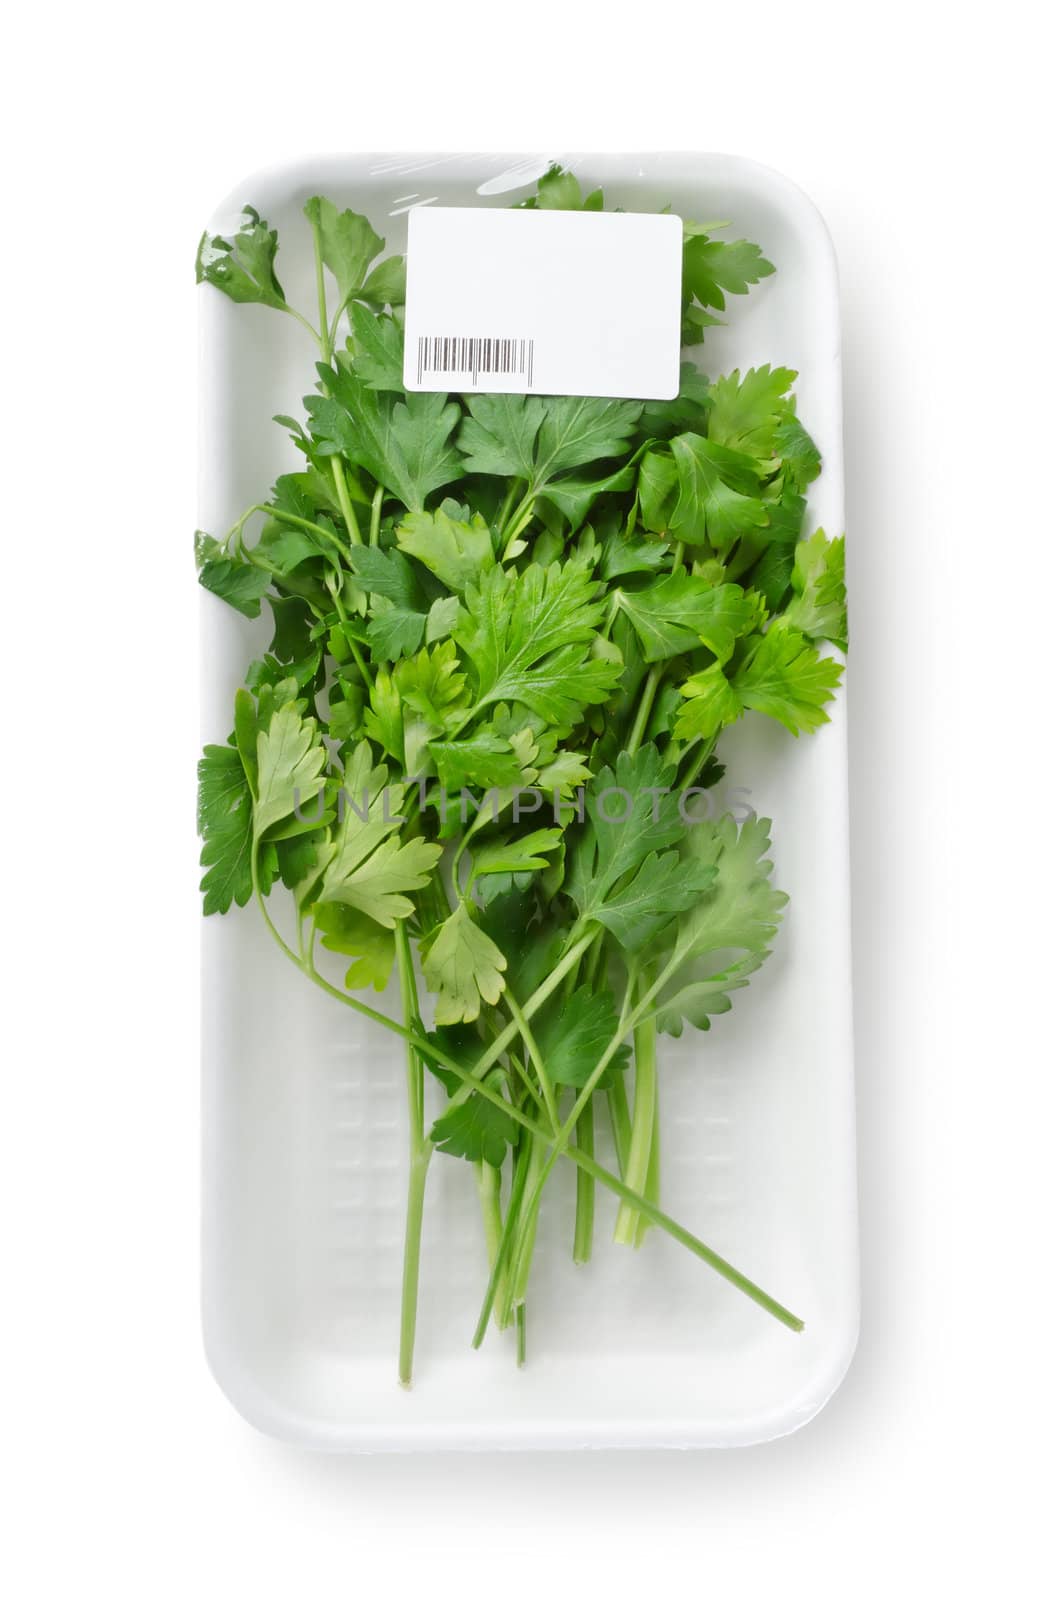 Packed parsley by Givaga